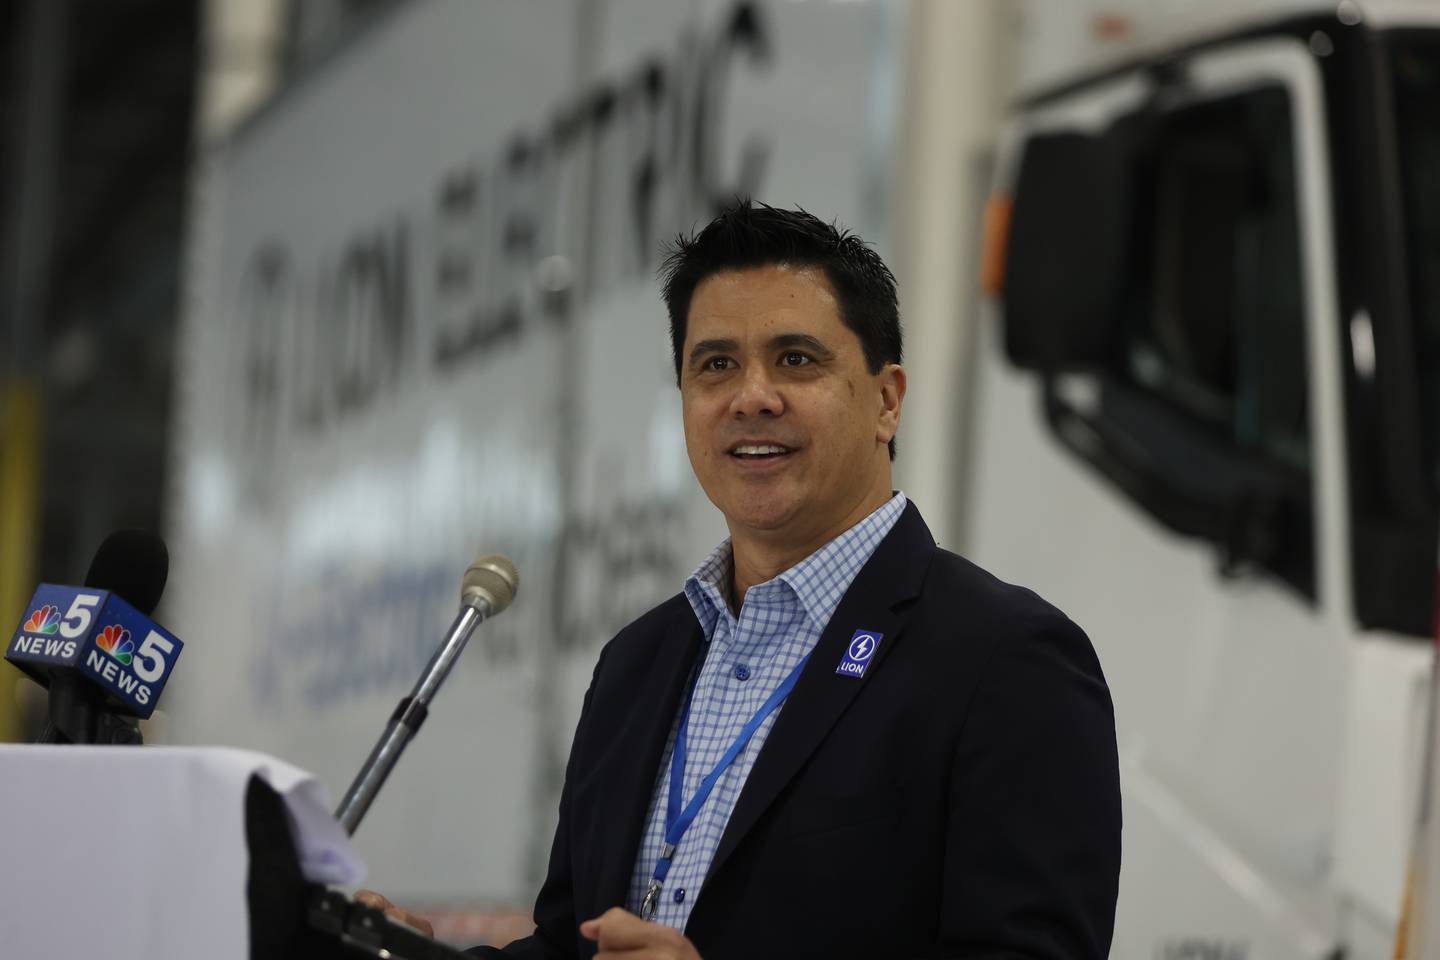 Nate Baguio, Senior Vice President of Commercial Development for Lion Electric, speaks during a press conference and interactive tour of the Lion Electric vehicle manufacturing facility. Monday, Mar. 21, 2022, in Joliet.